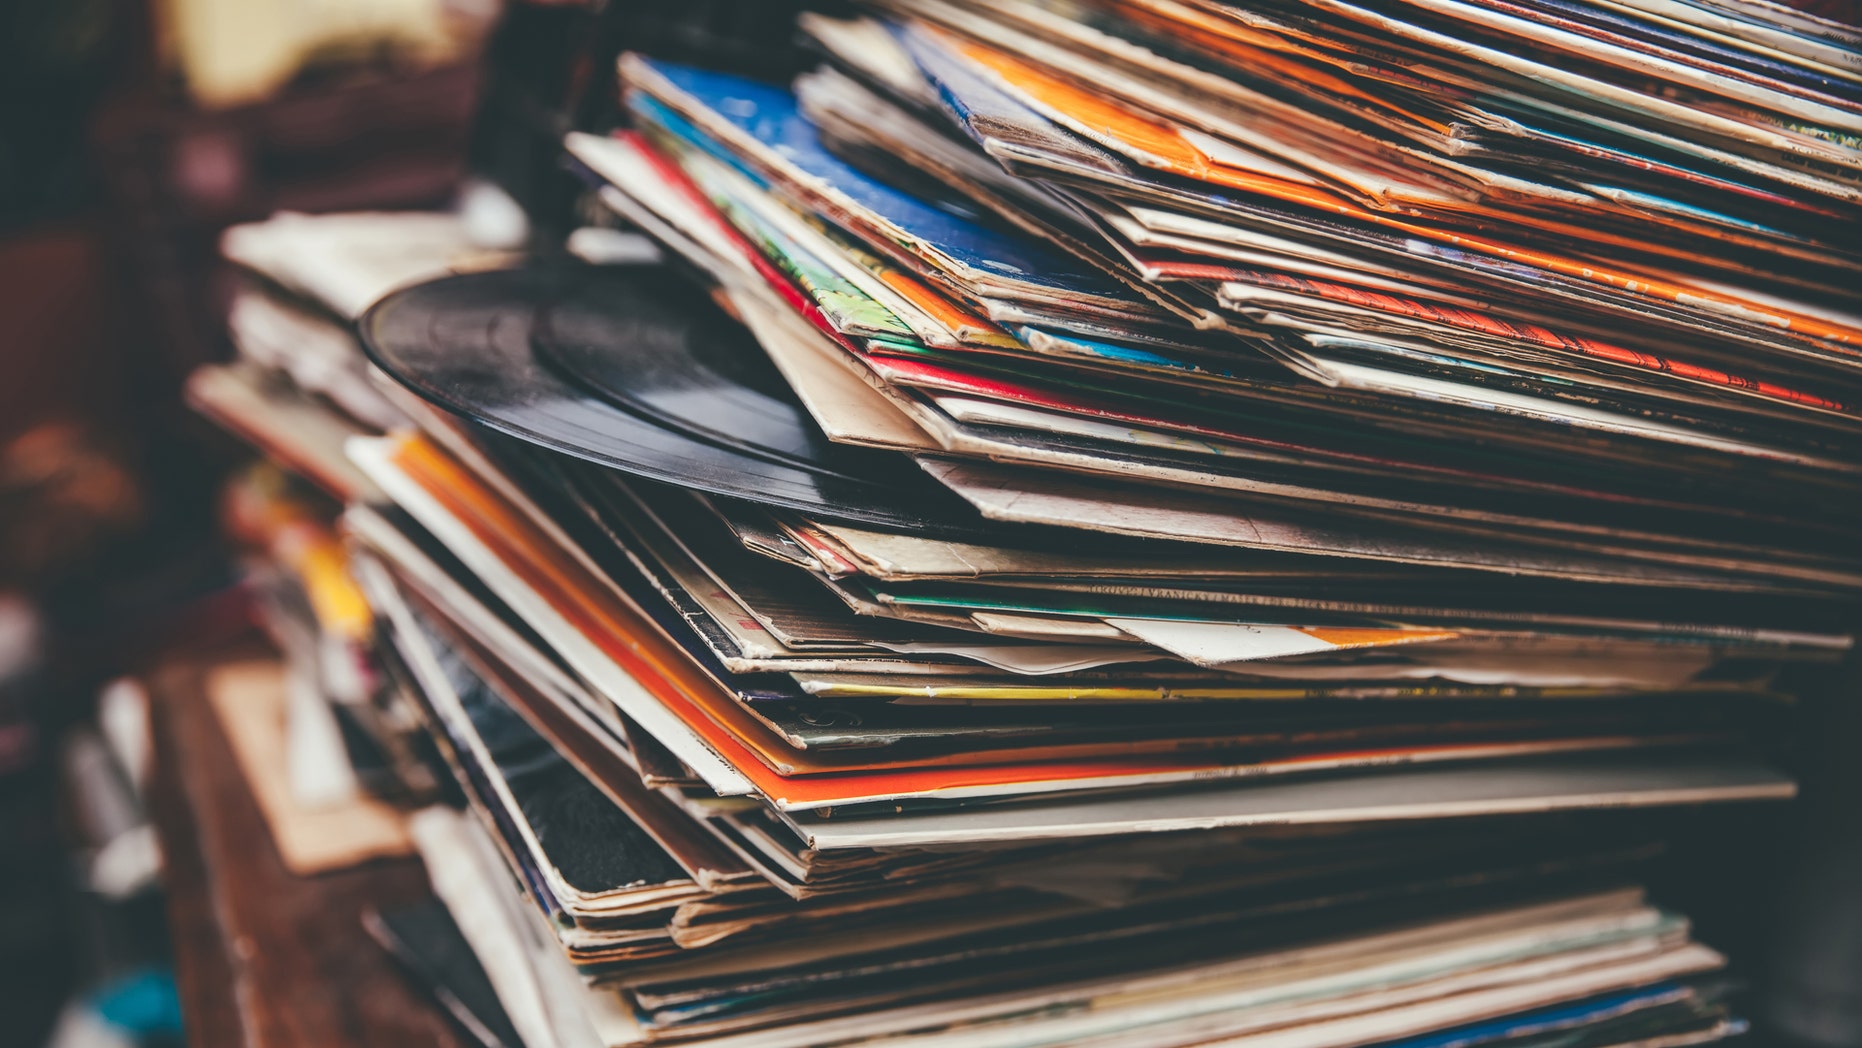 Best Vinyl Records For Collection - www.inf-inet.com